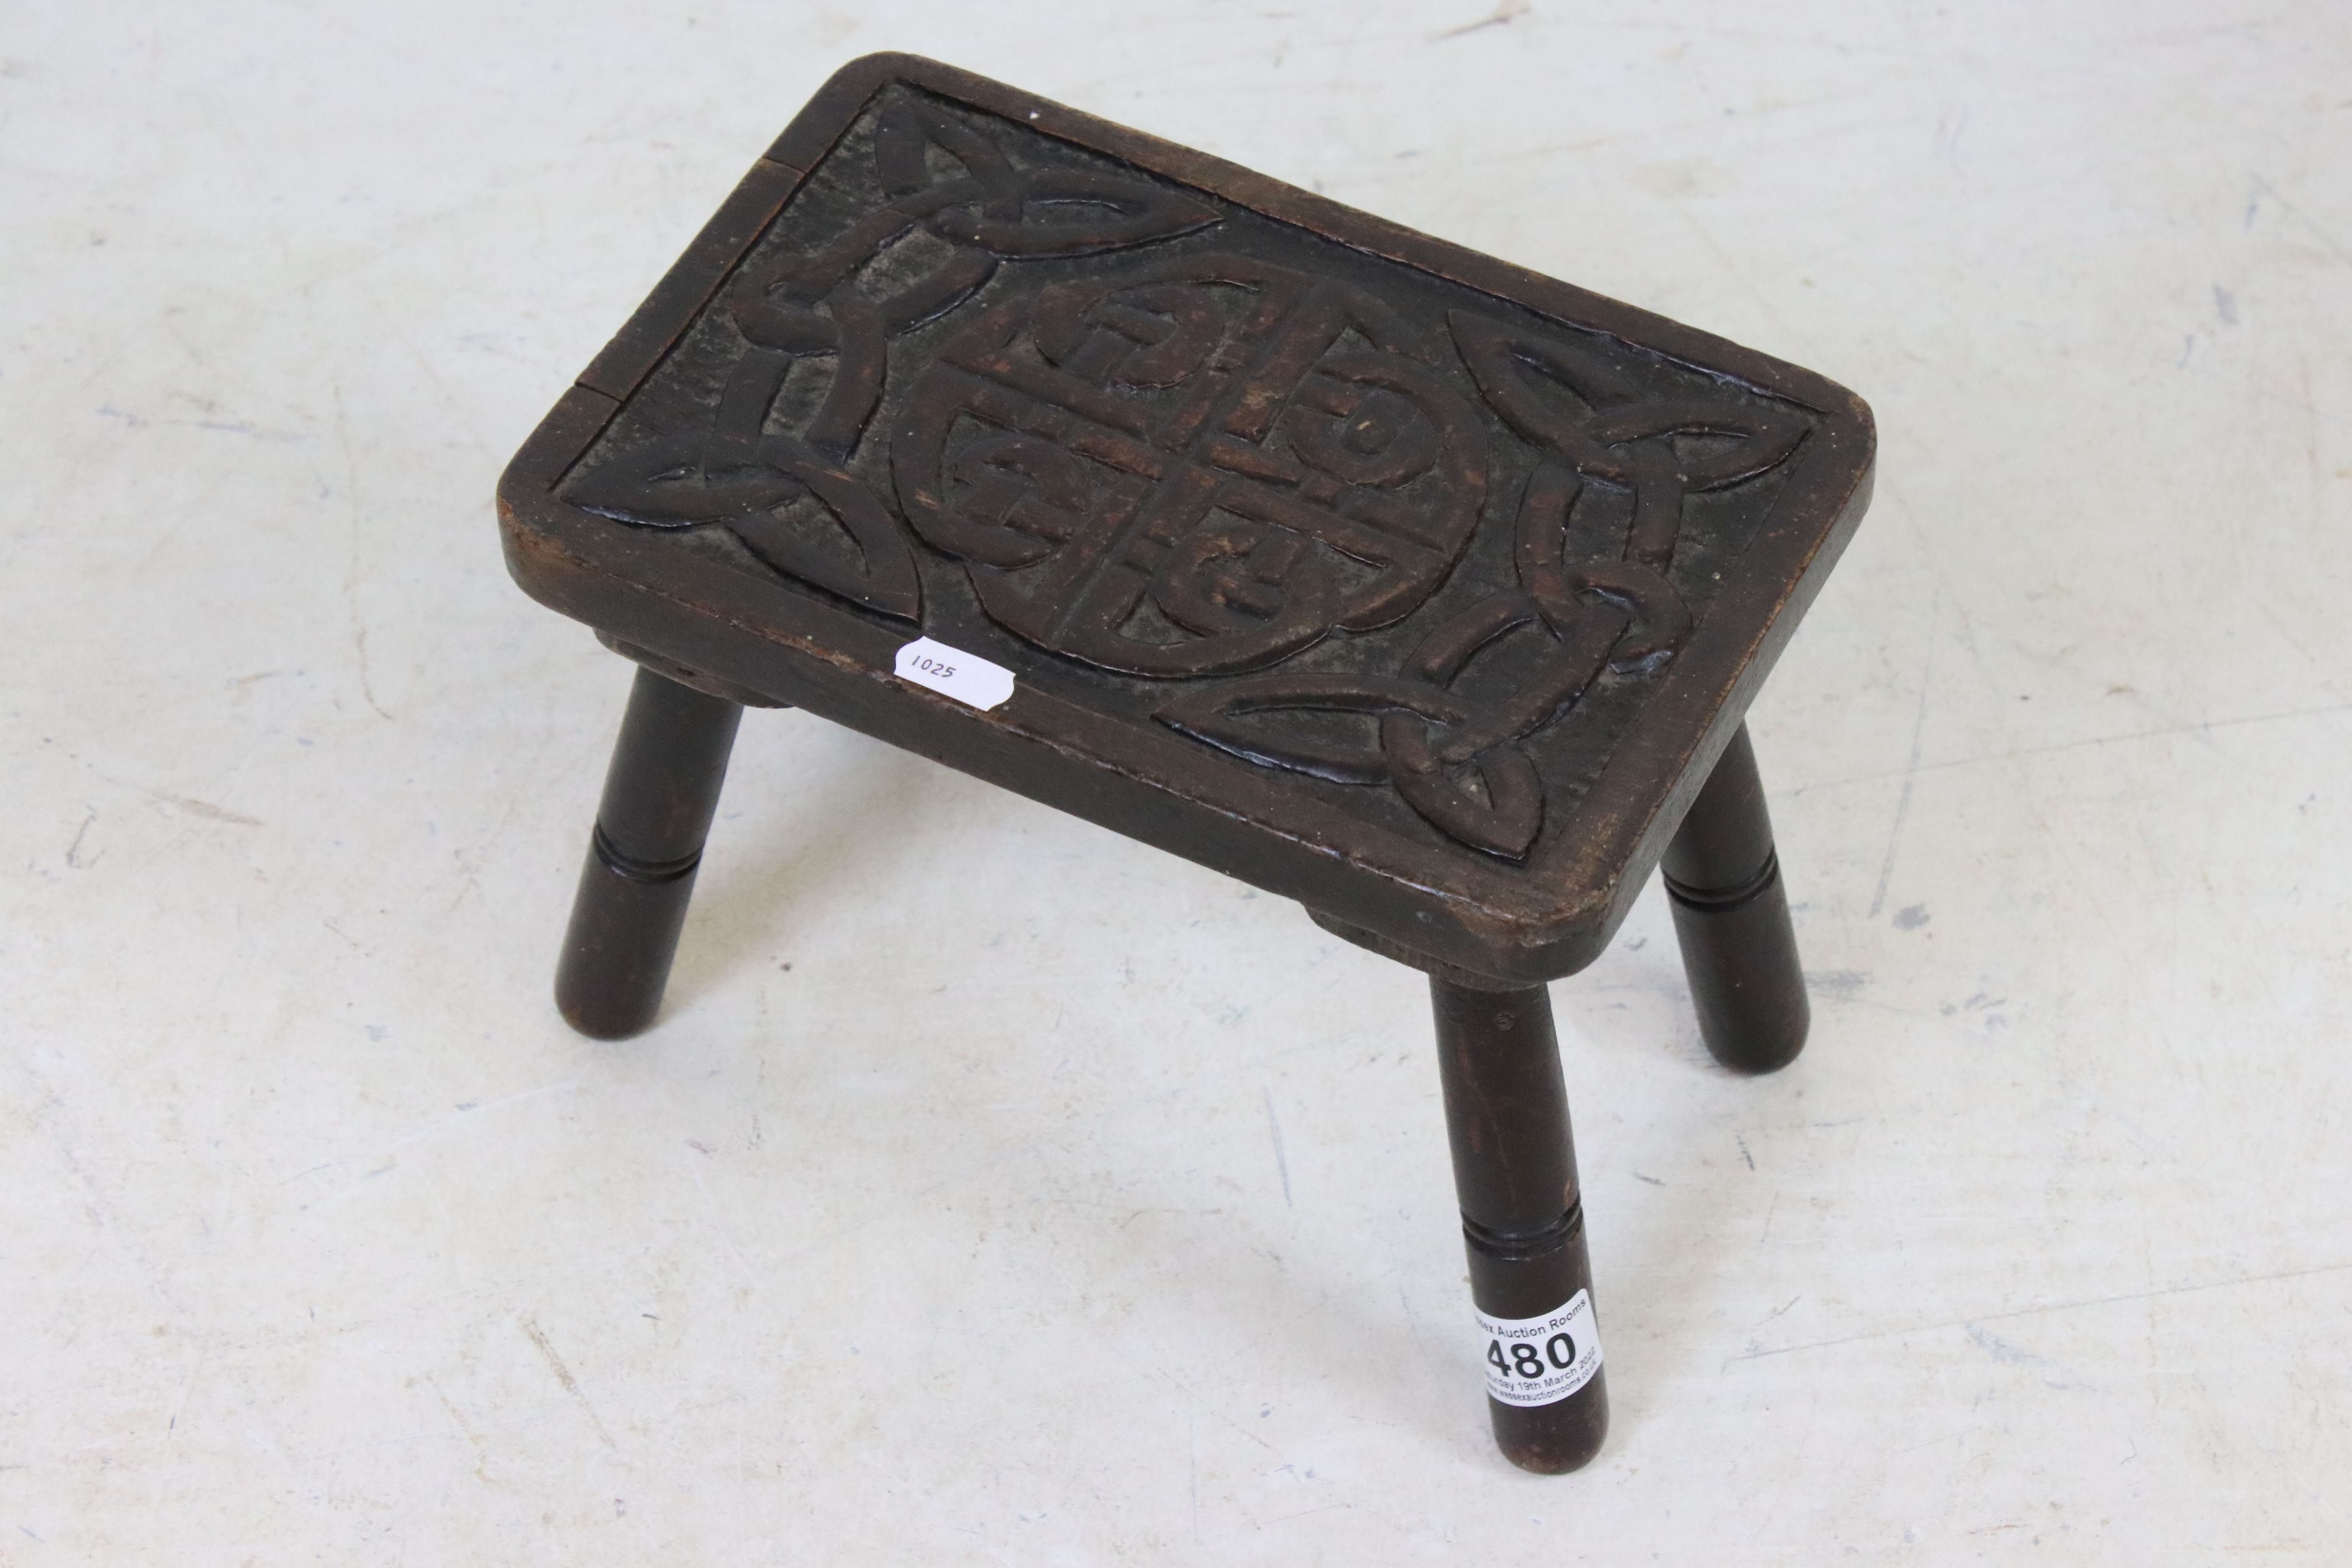 Late 19th / Early 20th century Small Wooden Stool with Celtic Knot carved decoration to top, 28cm